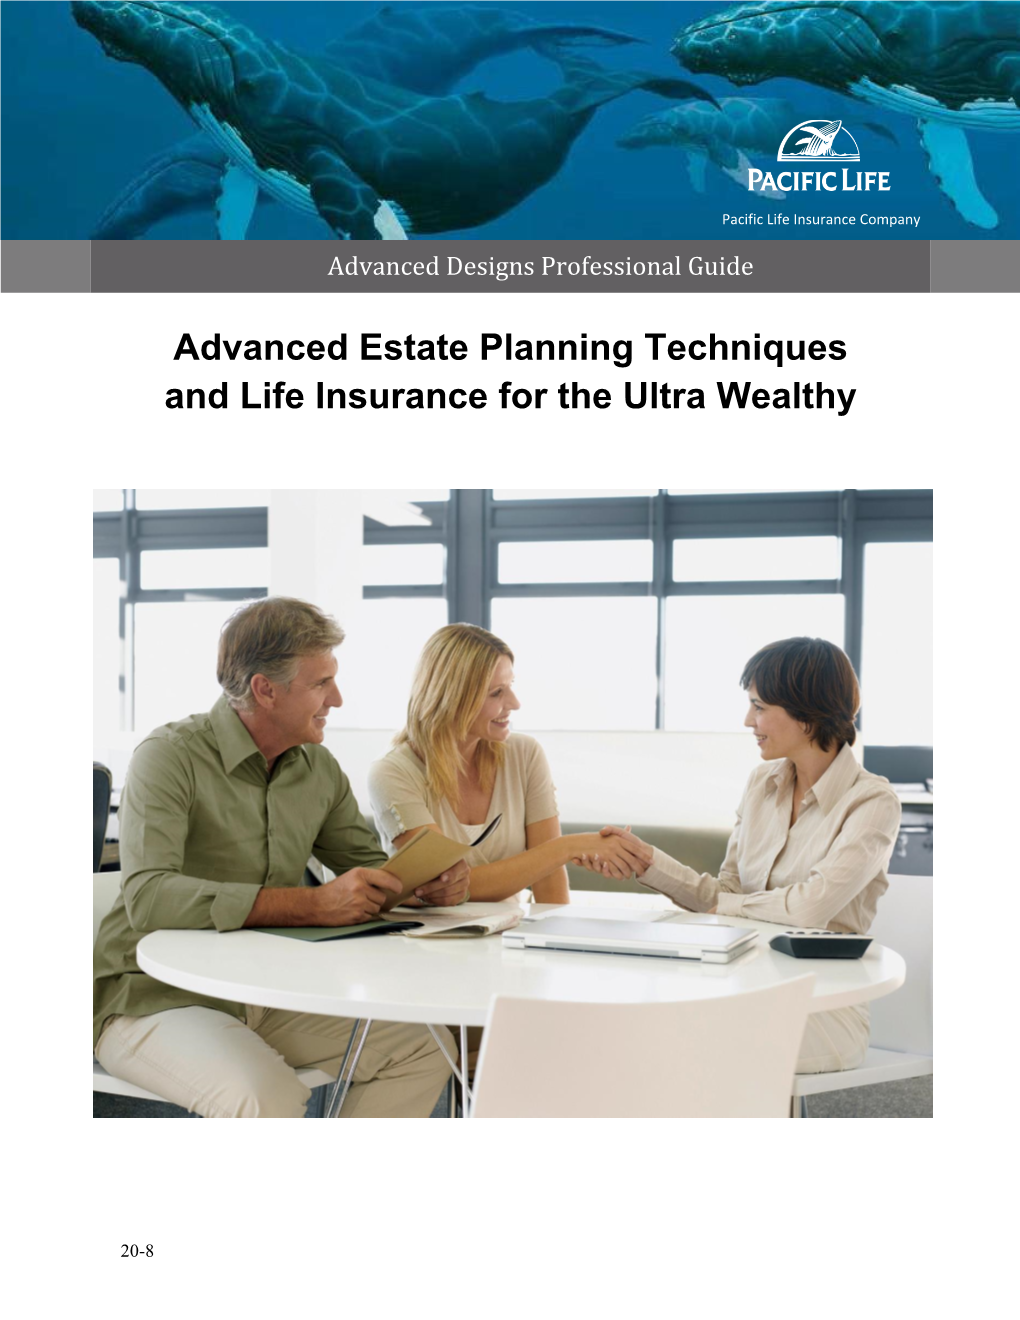 Advanced Estate Planning Techniques and Life Insurance for the Ultra Wealthy